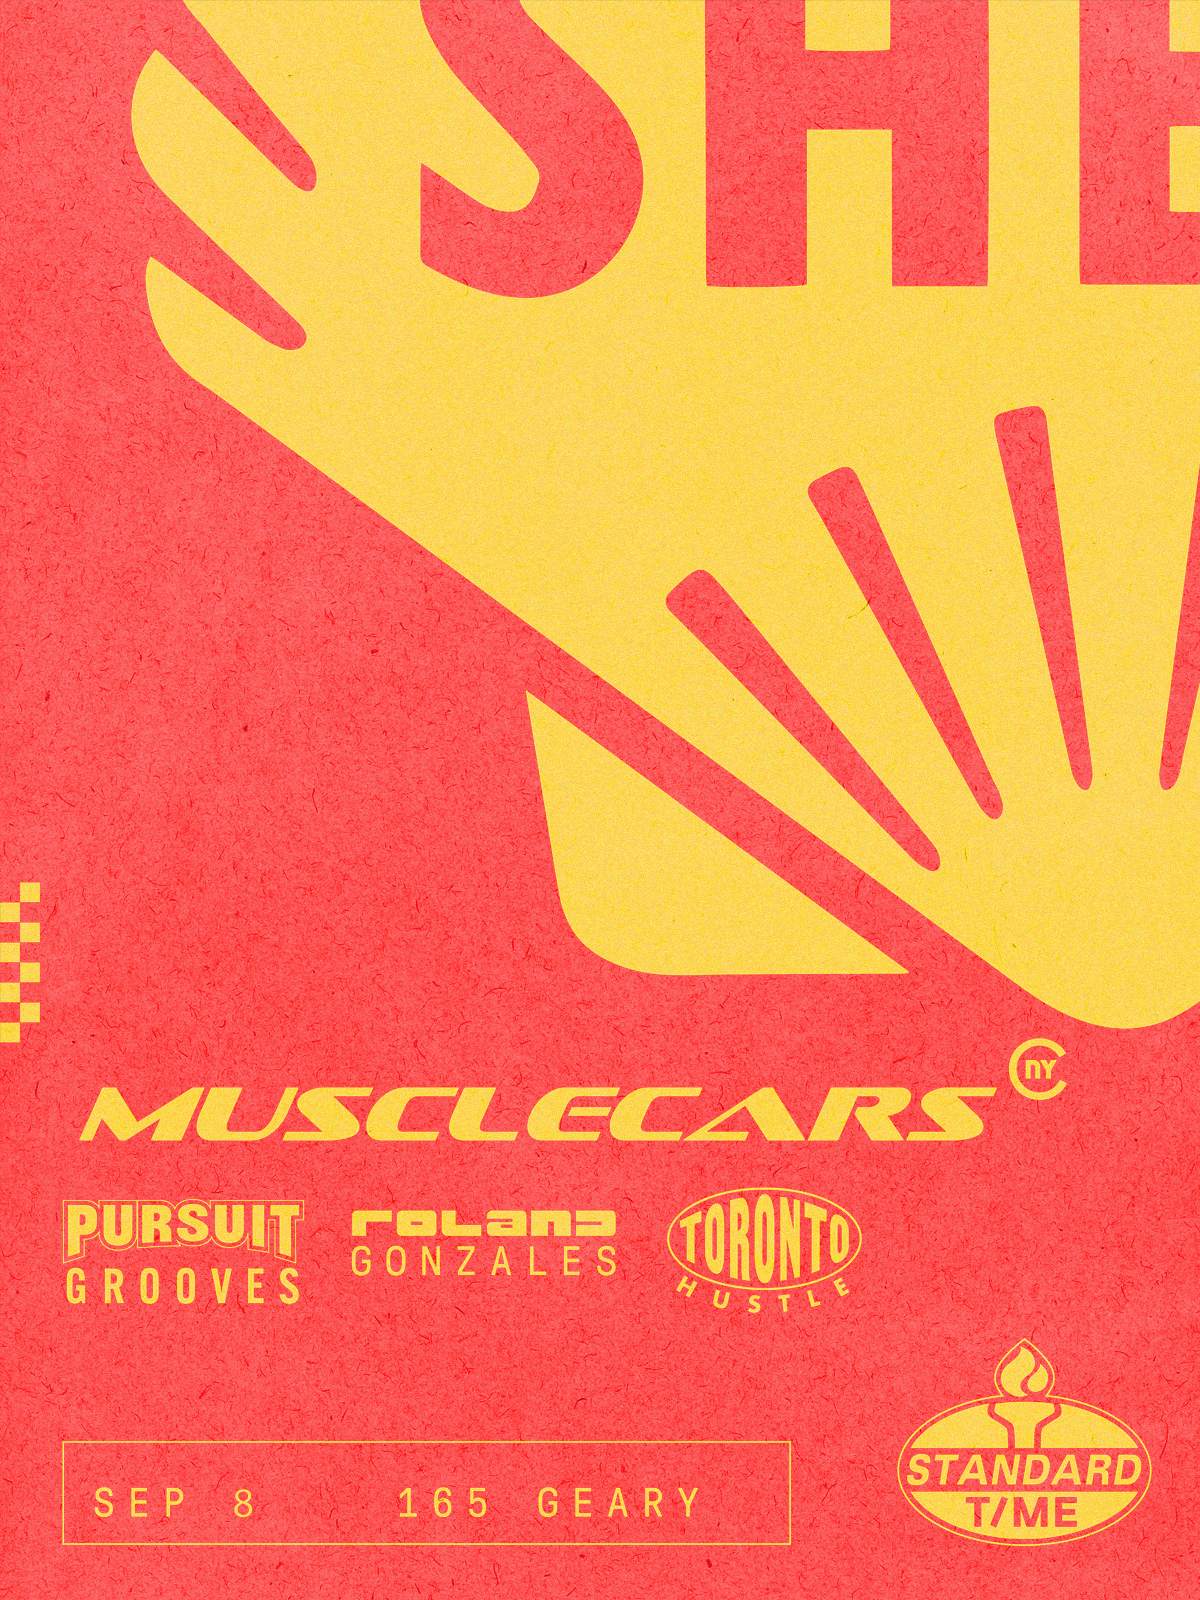 047: POSTPONED Musclecars, Roland Gonzales b2b Toronto Hustle and Pursuit Grooves - フライヤー裏